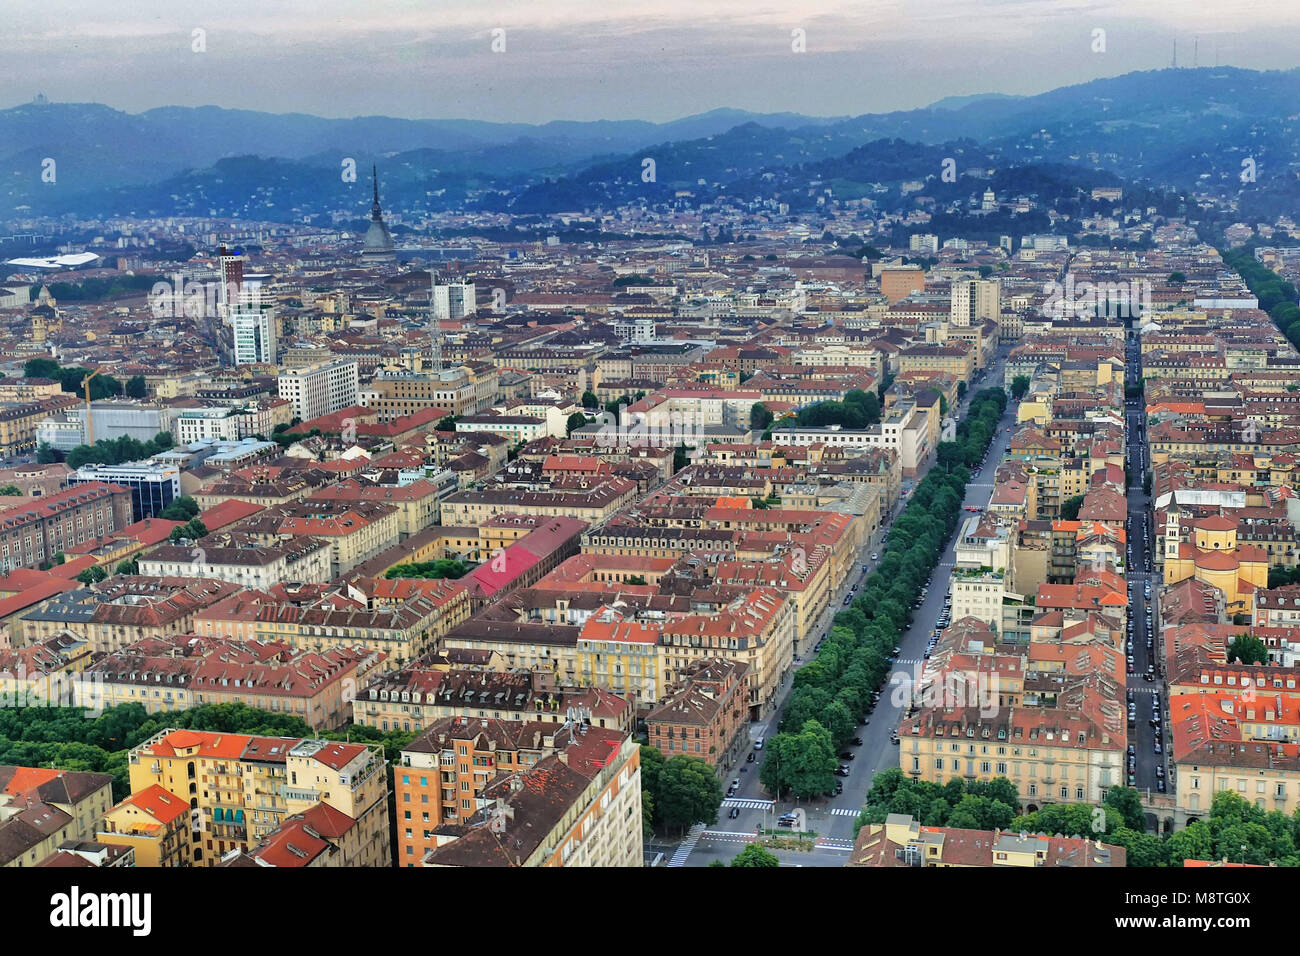 Aerial drone view of the city downtown and surrounding hills at sunset Turin Italy july 13 2016 Stock Photo